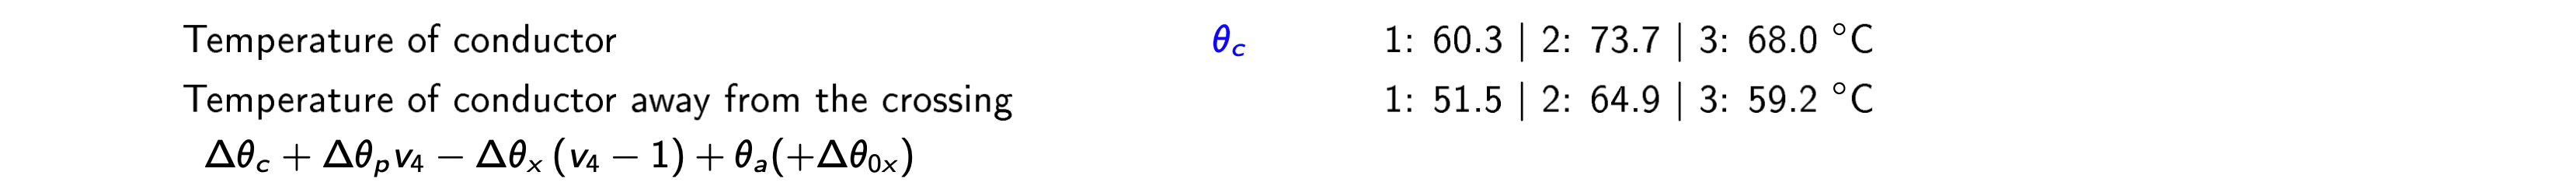 Example of temperature output